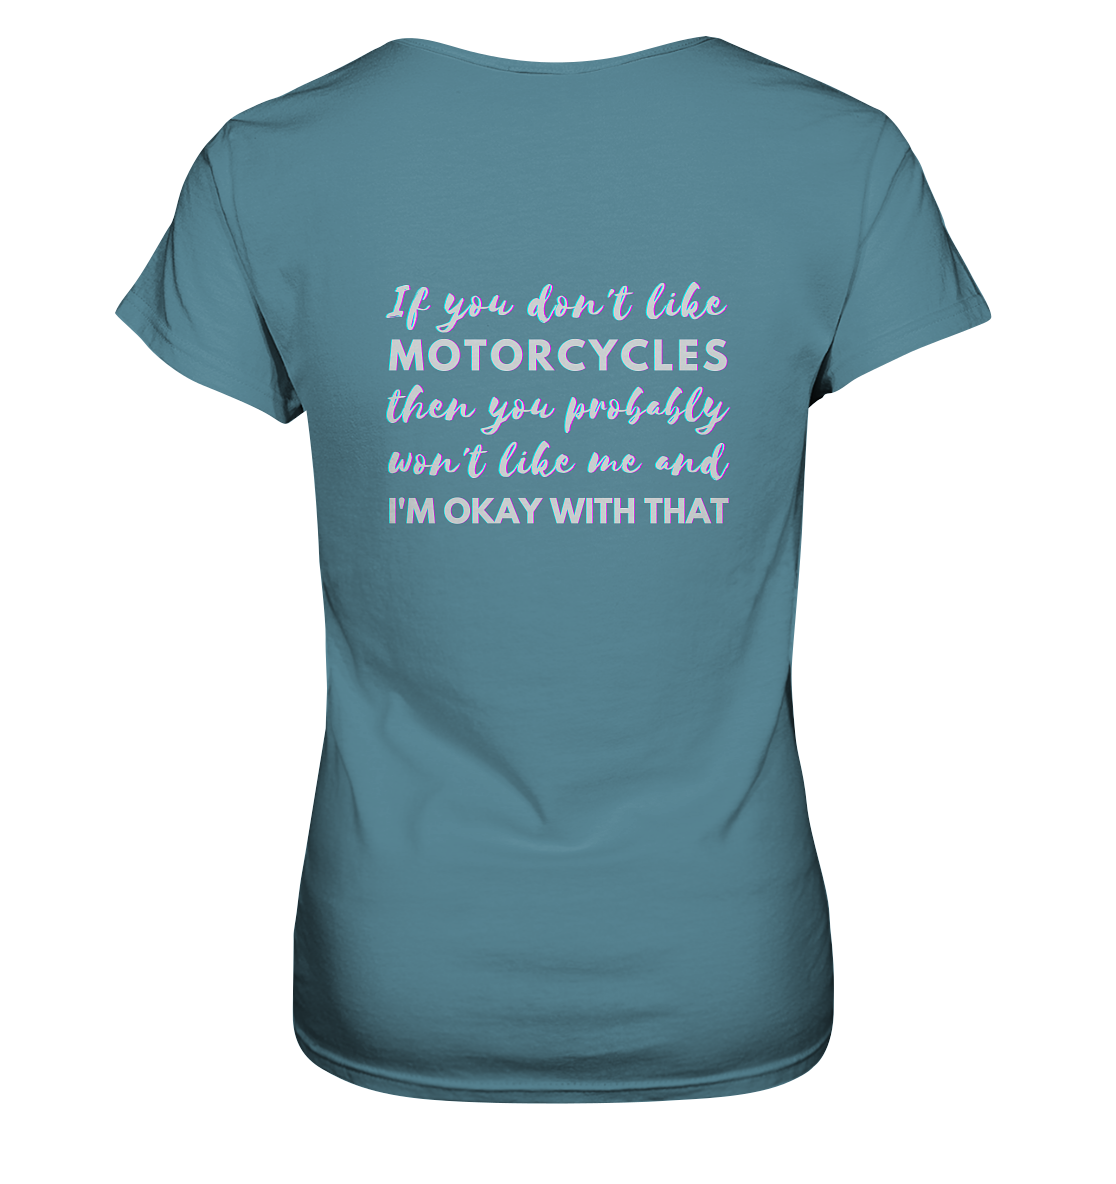 Damen-T-Shirt, Rundhals, mit weißem Spruch auf dem Rücken "If you don't like motorcycles, you problably won't like me and I'm okay with that." hell blau